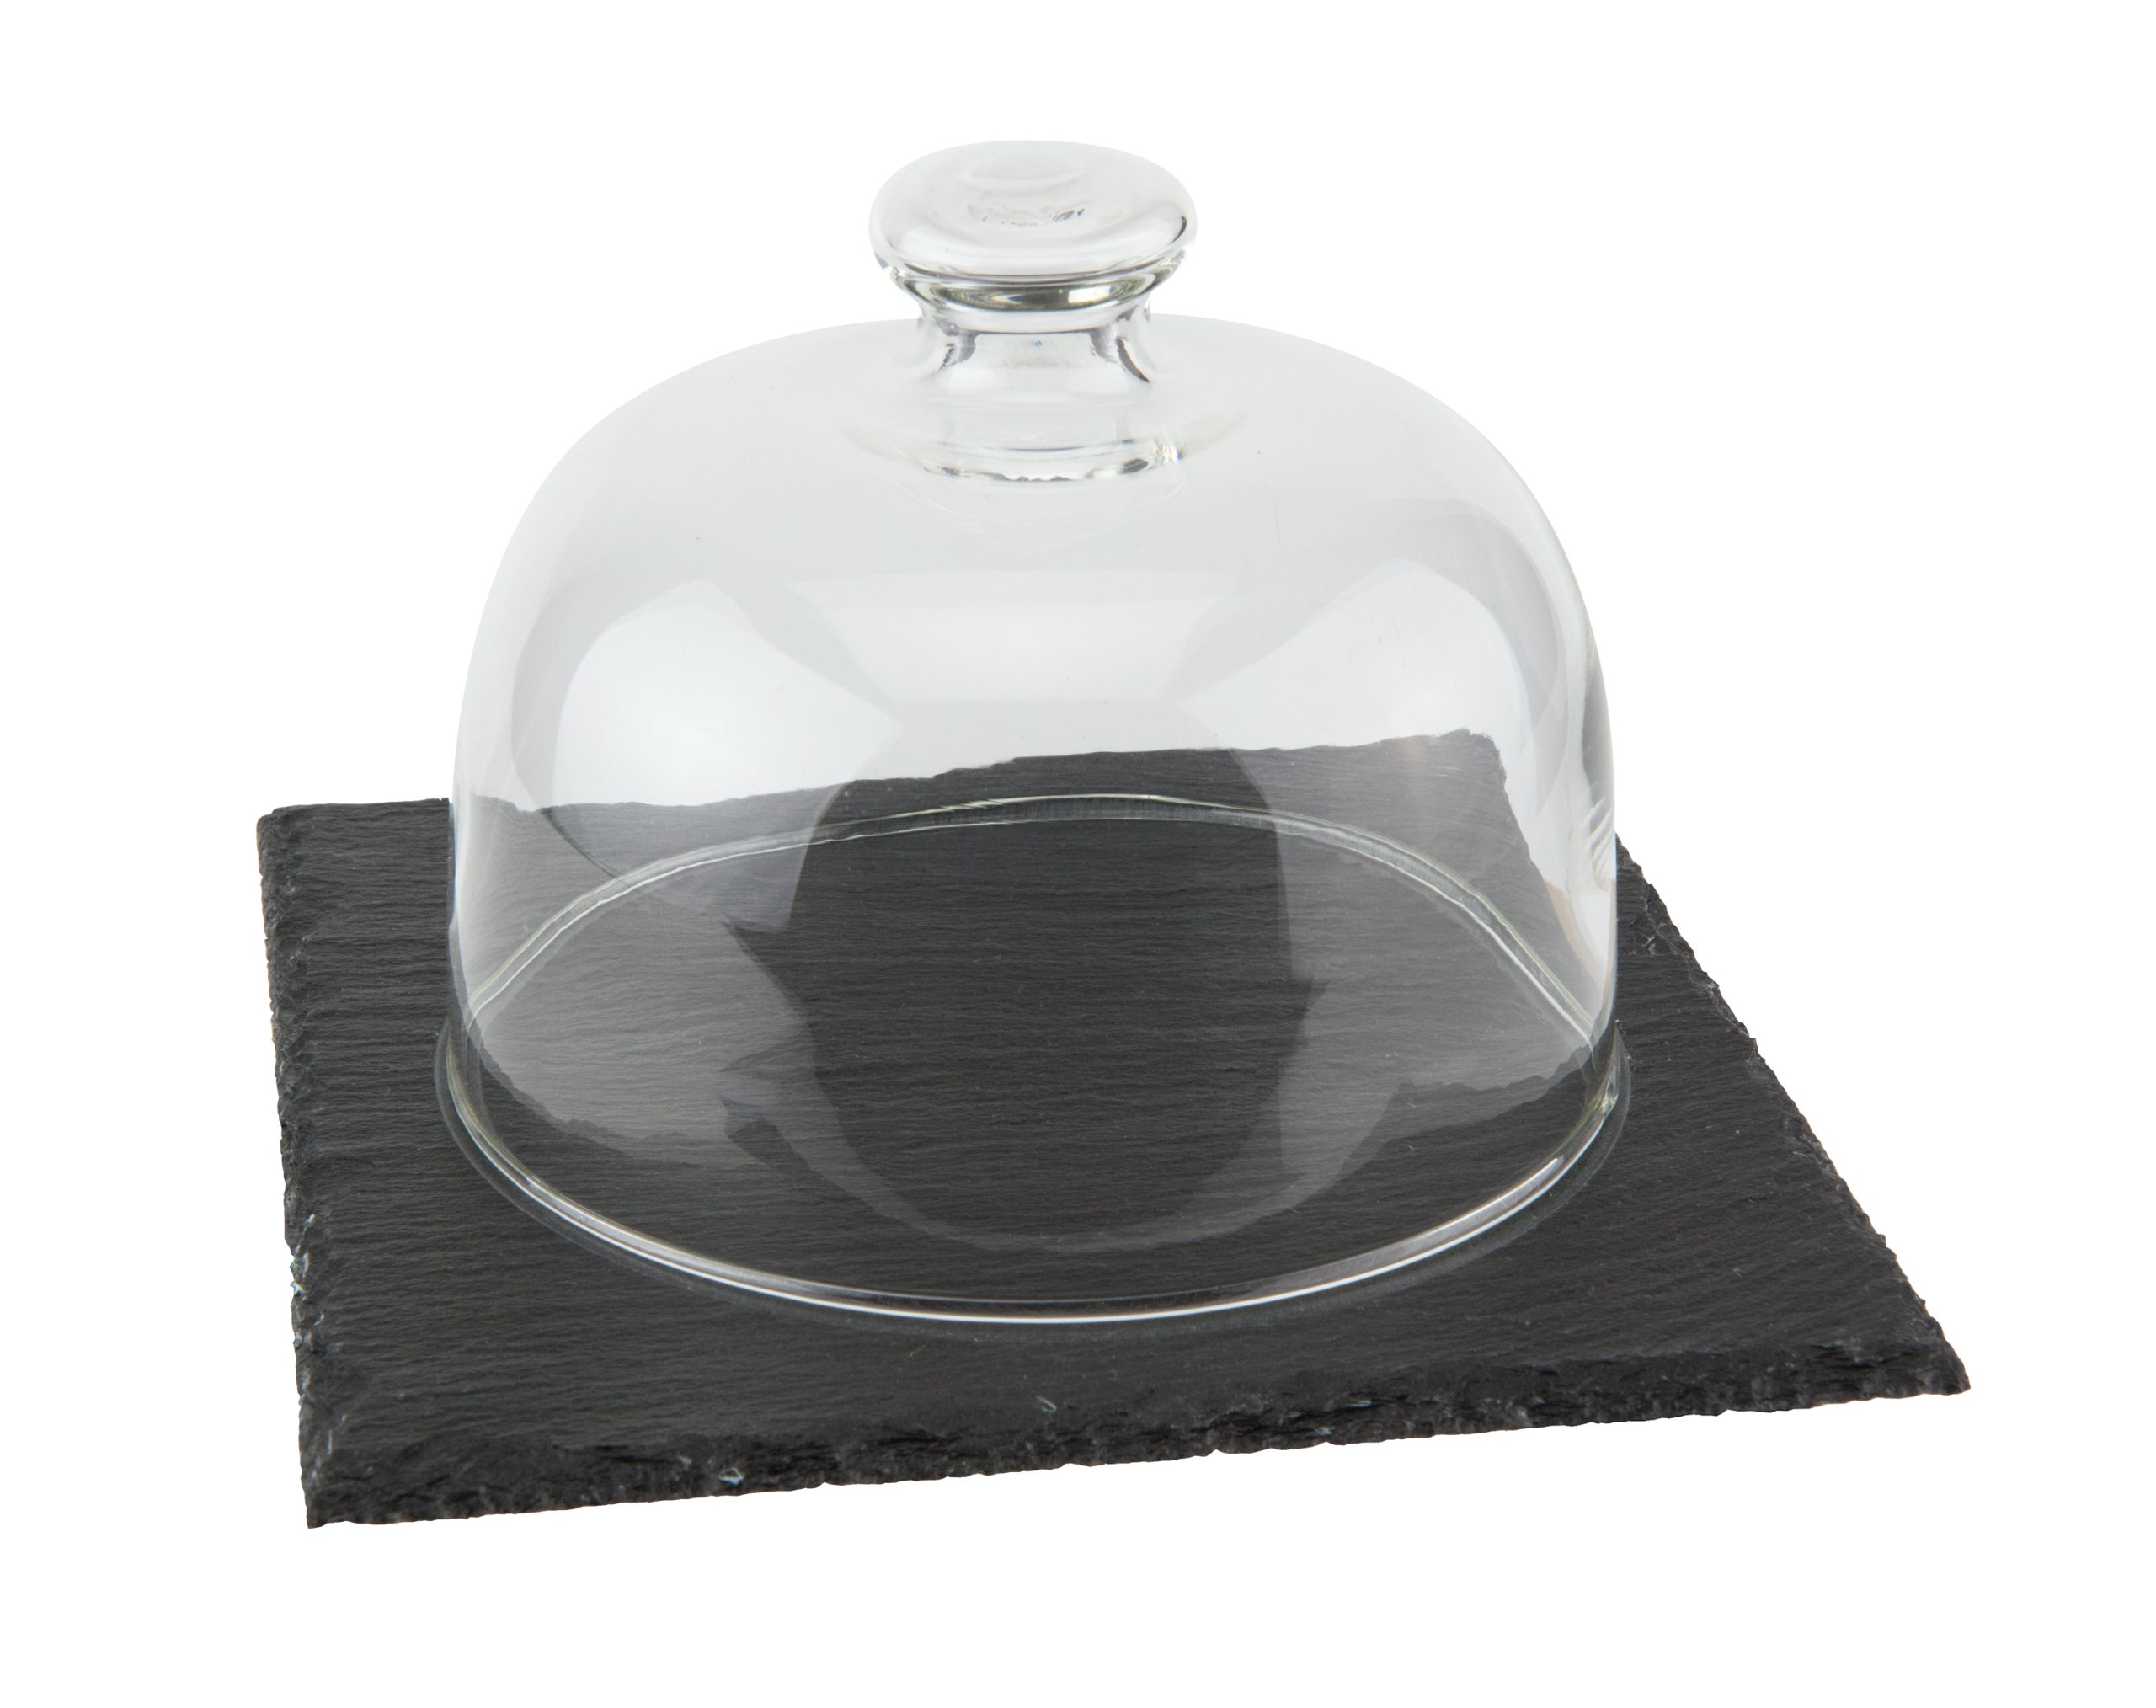 SQUARE TRAY WITH DOME 17*17*12 ILSA ITALY